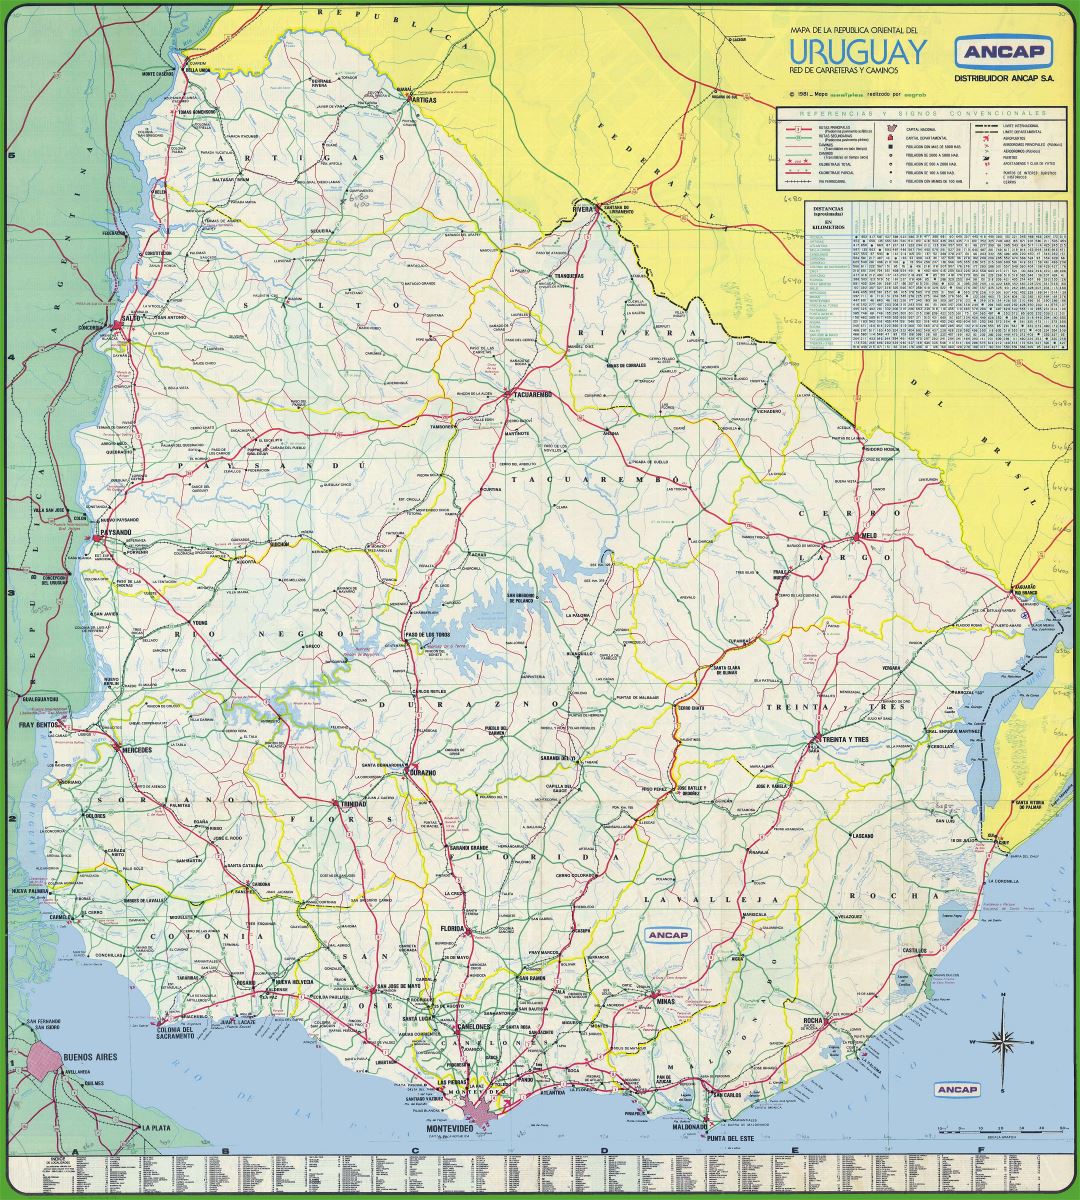 Large scale road map of Uruguay with all cities